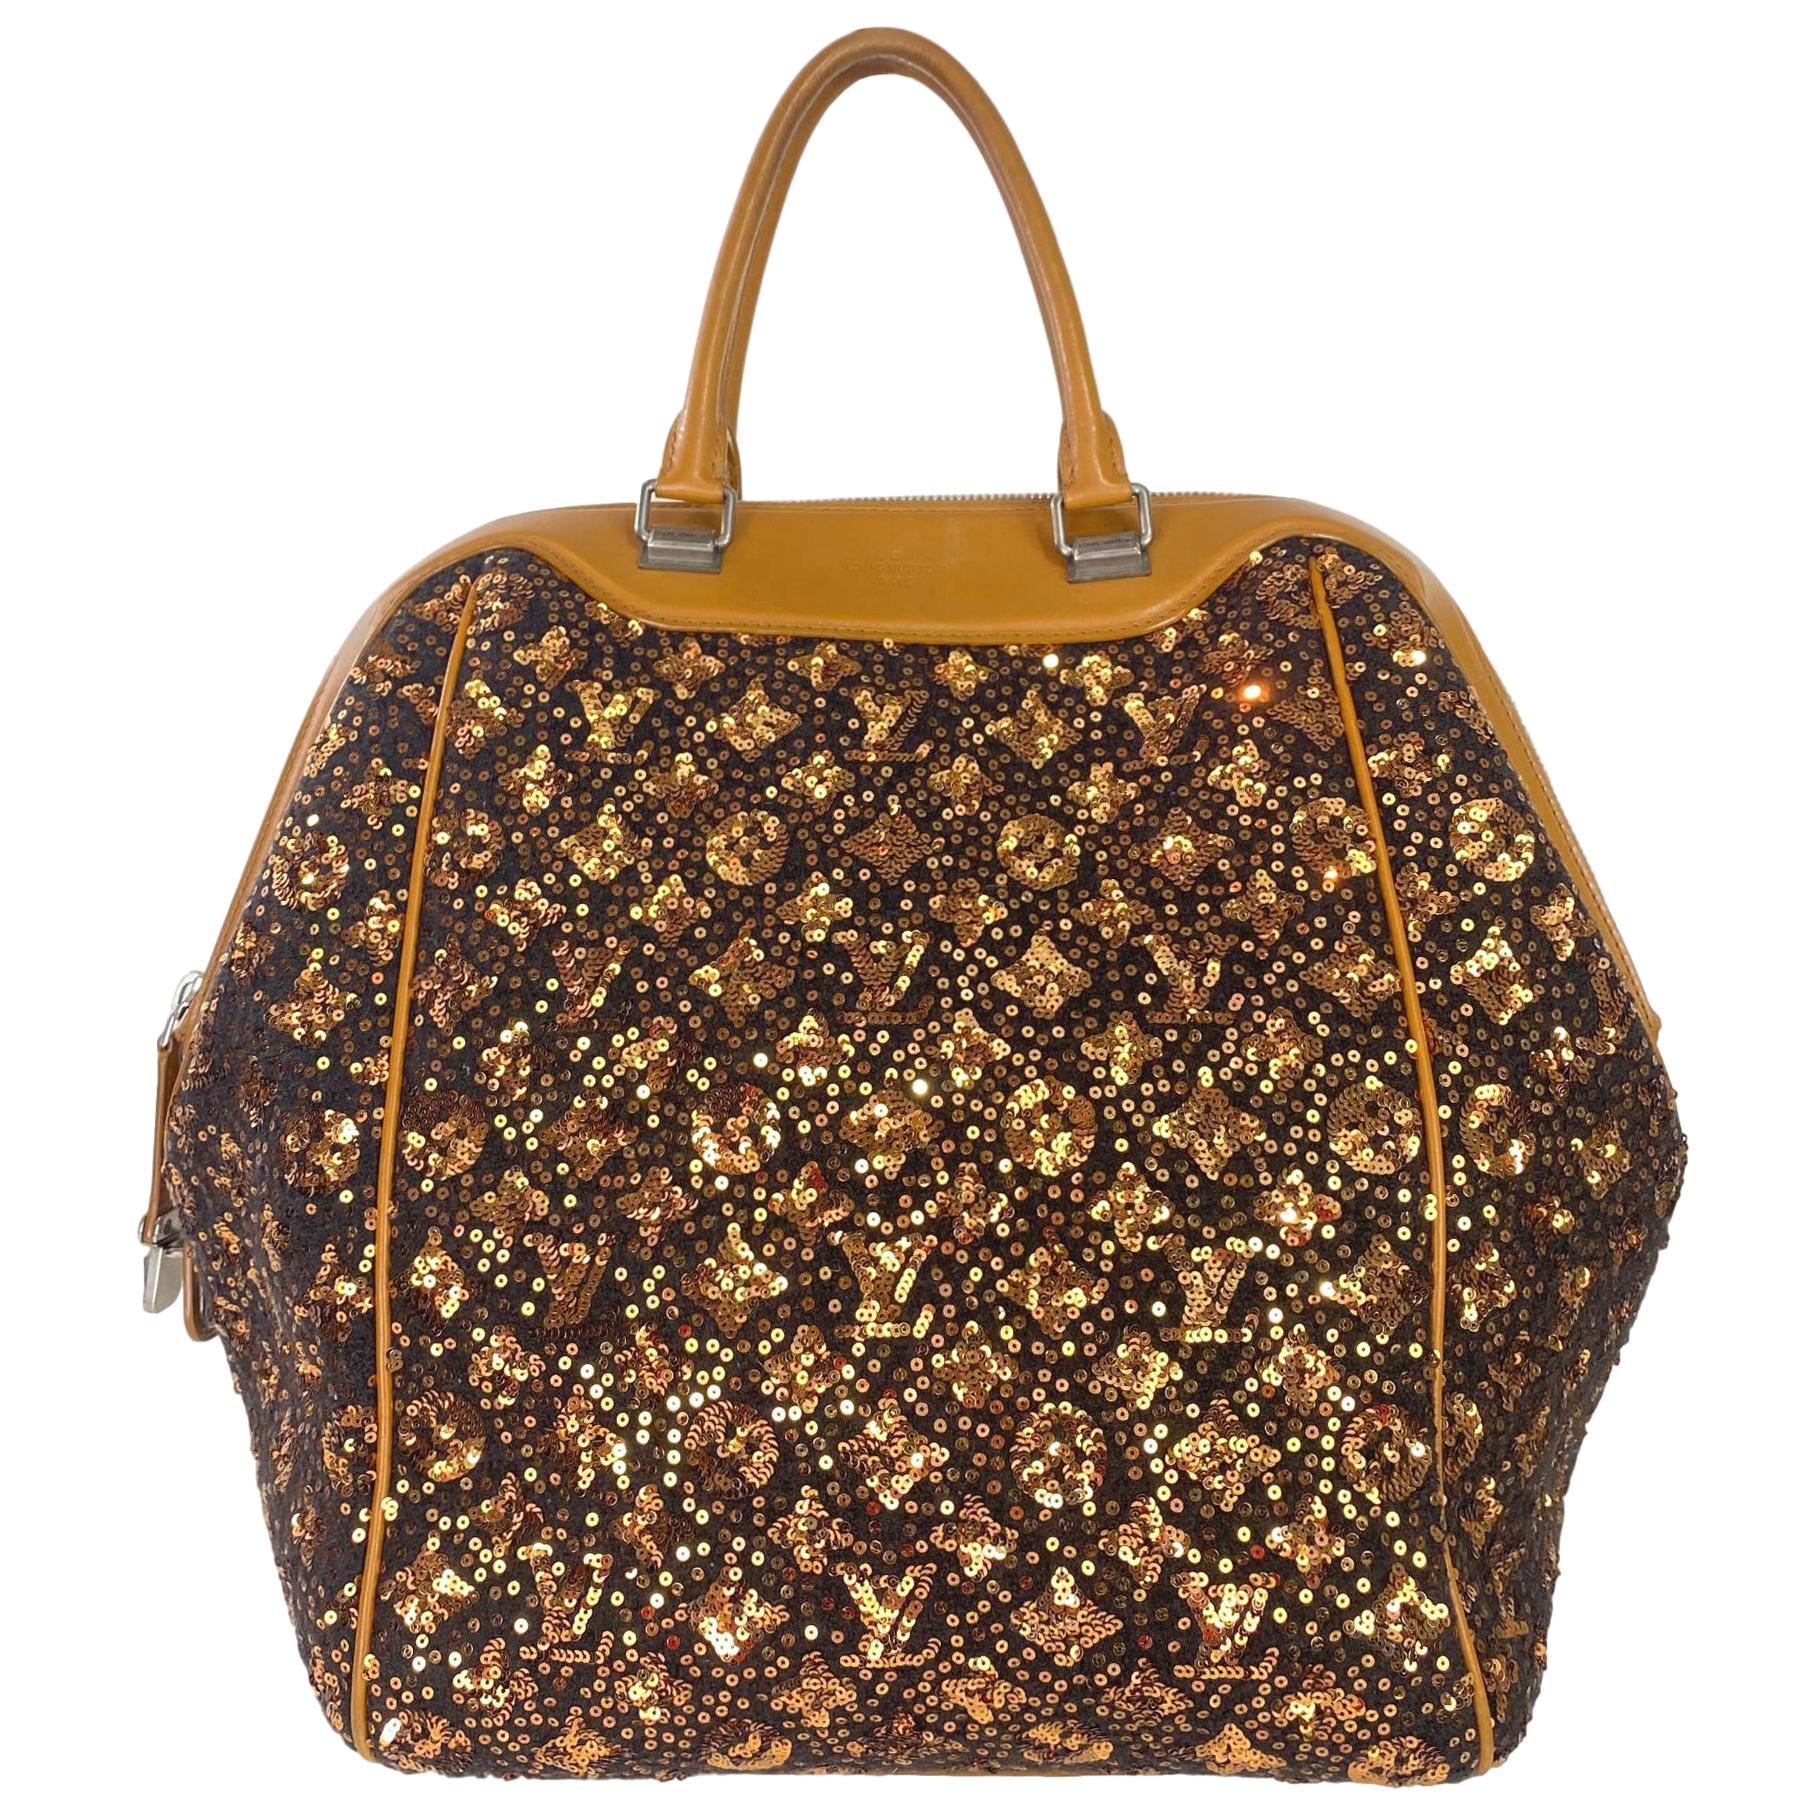 Limited Edition Louis Vuitton North South Sunshine Express Sequin